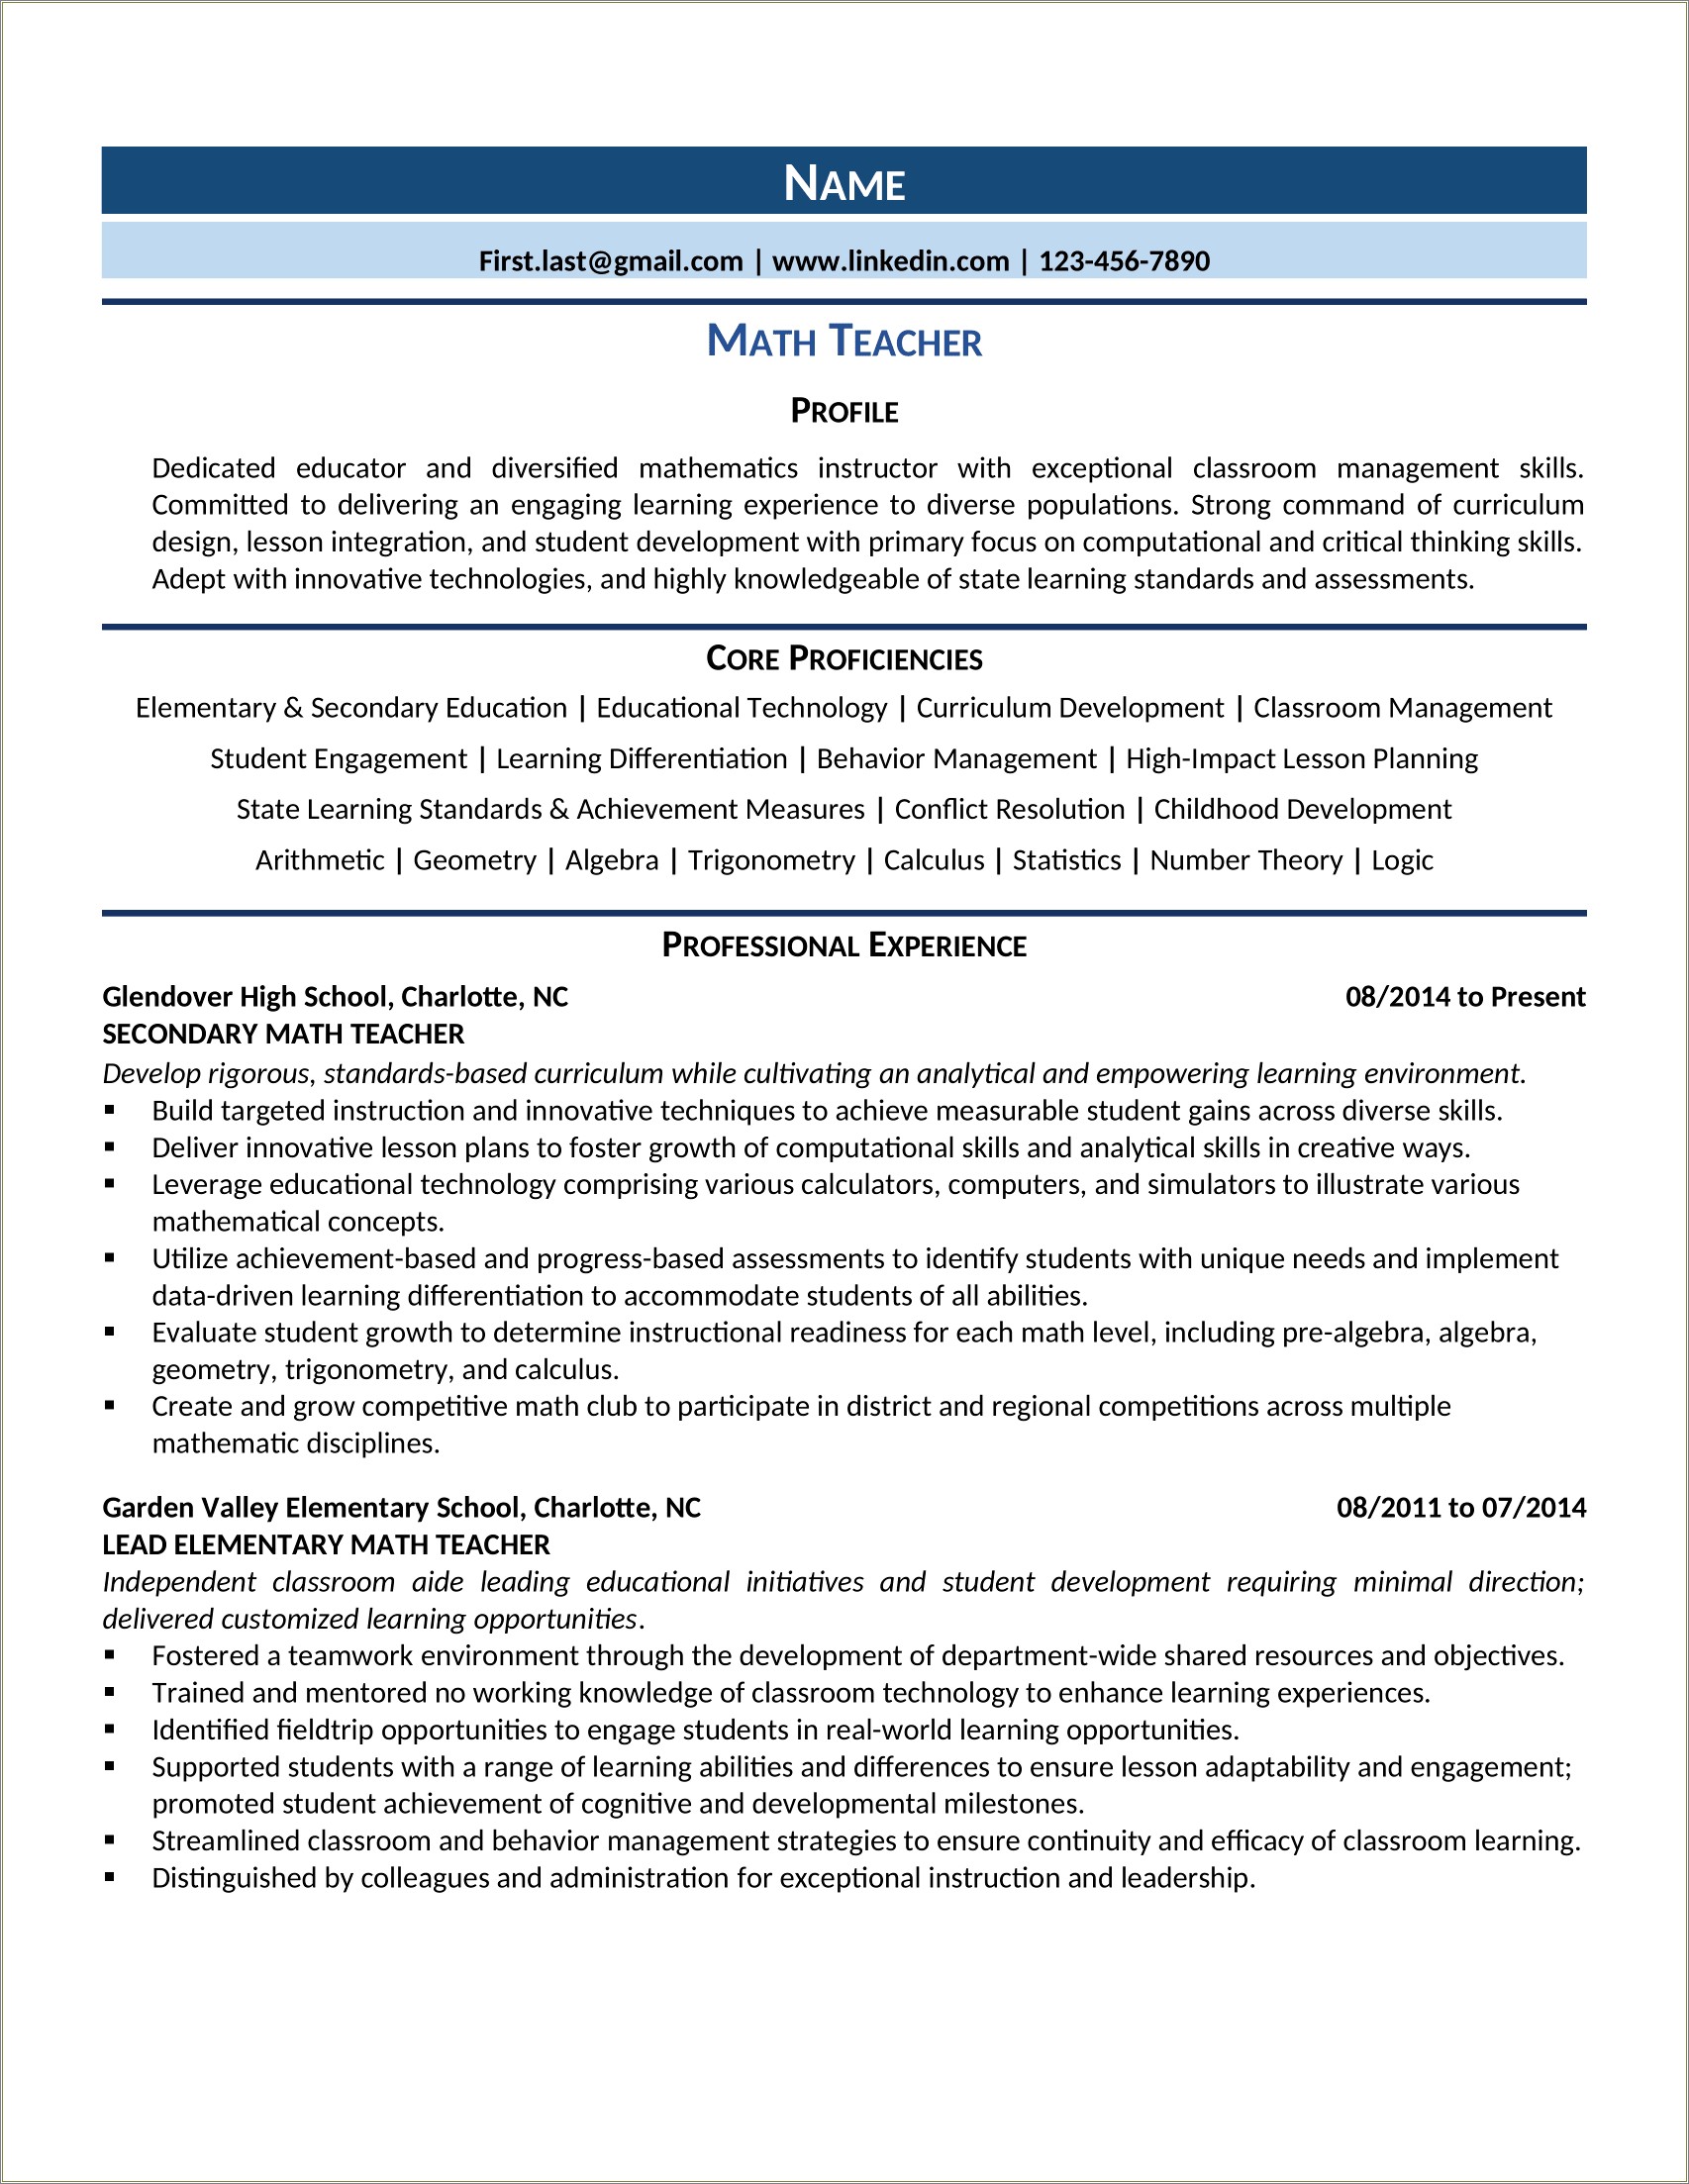 Educator With Combined Experience Resume Profile Examples